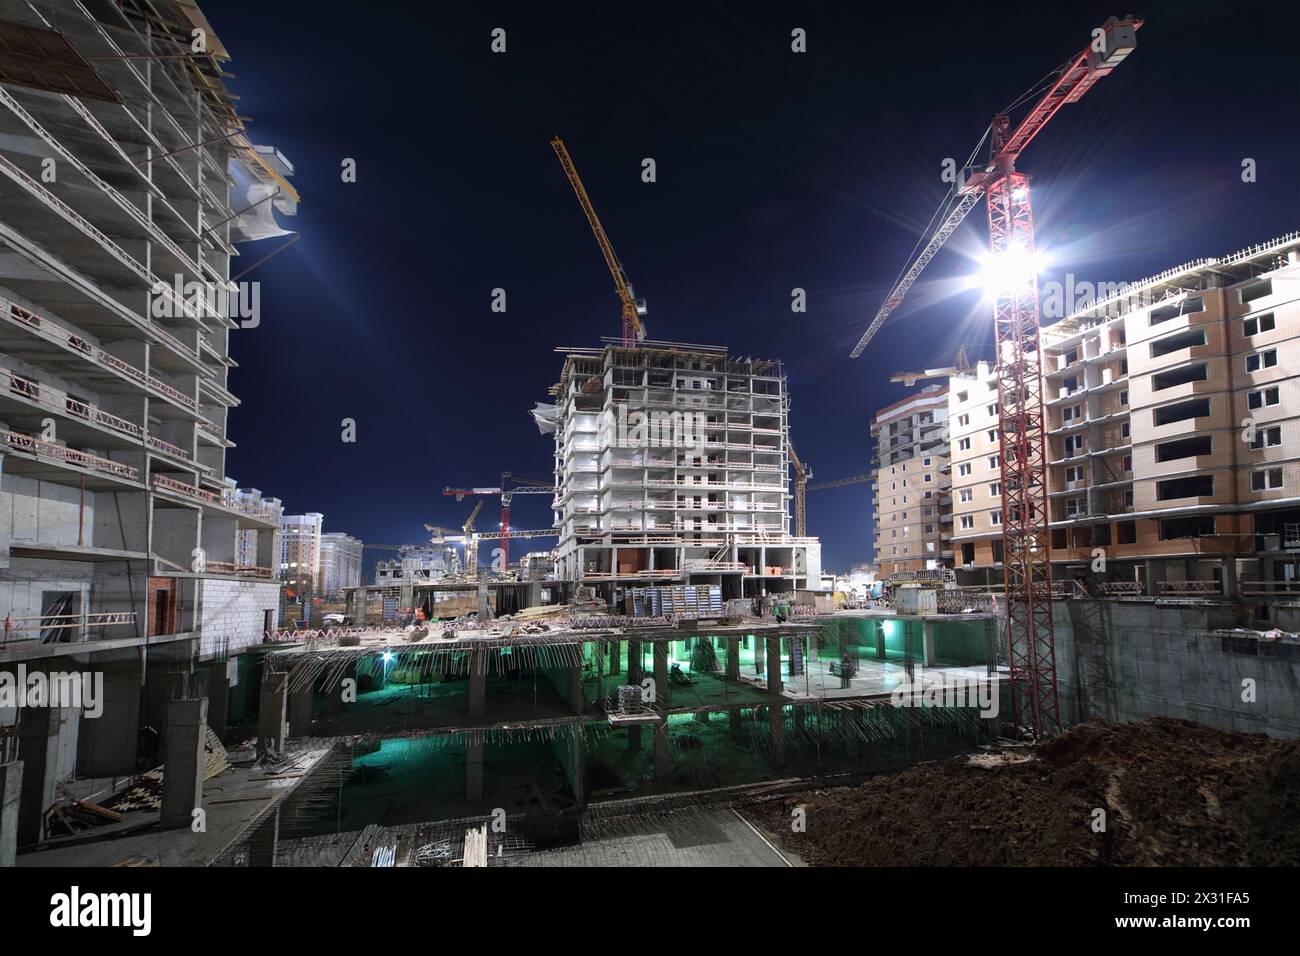 Lit multi-storey buildings under twenty-four-hour construction and cranes at night. Stock Photo